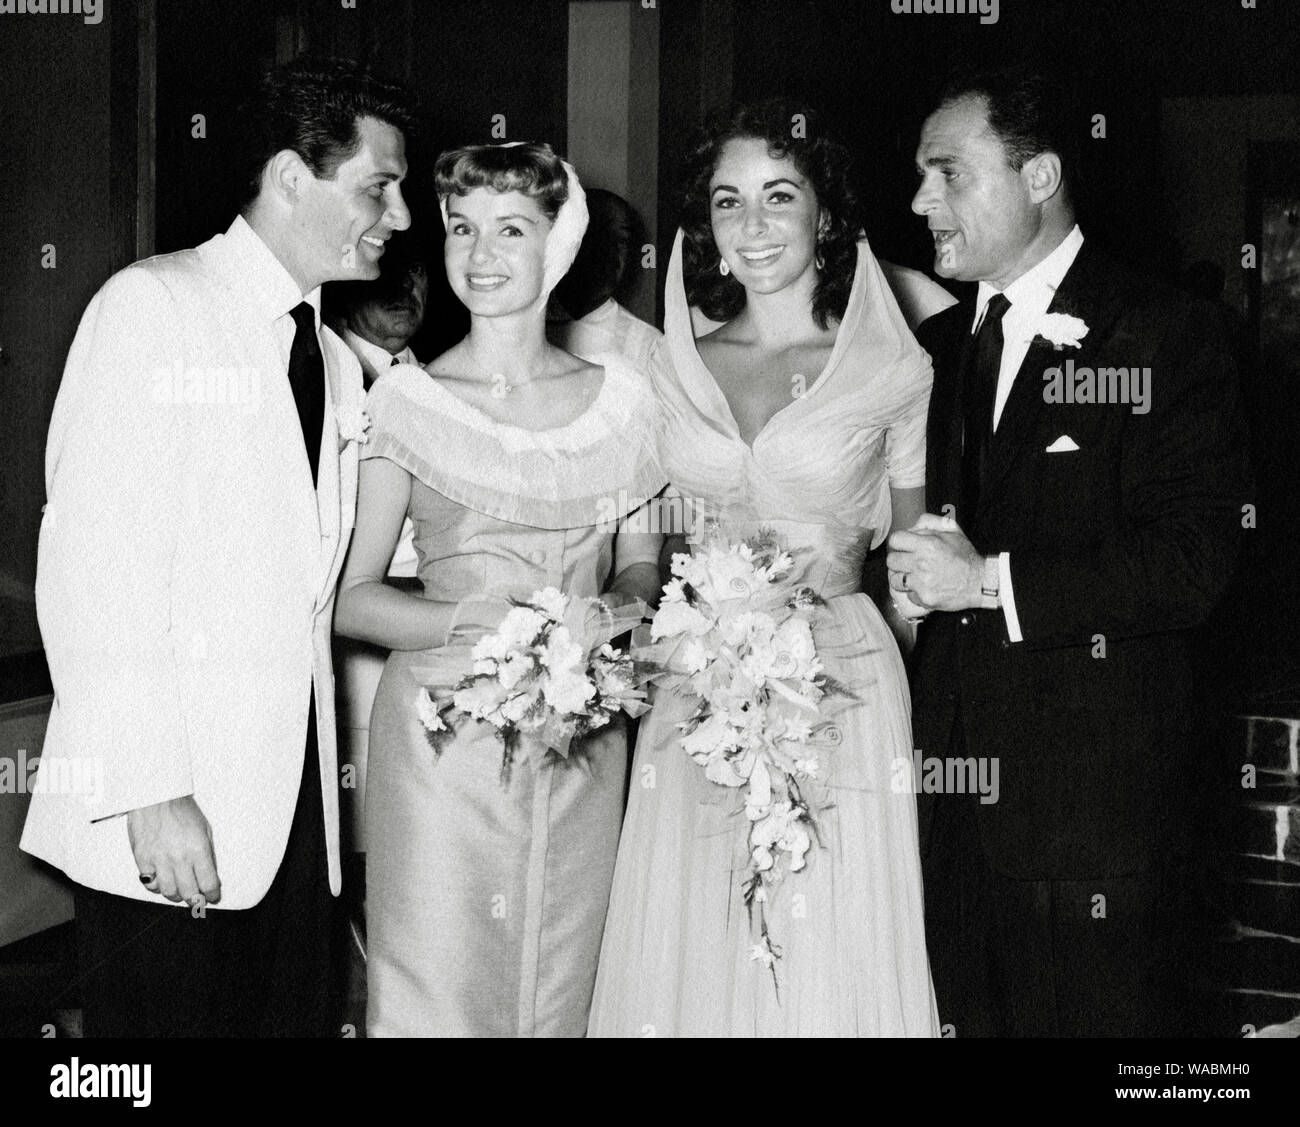 Eddie Fisher and Debbie Reynolds at the wedding of Elizabeth Taylor and Michael Todd (1957)  File Reference # 33848-299THA Stock Photo